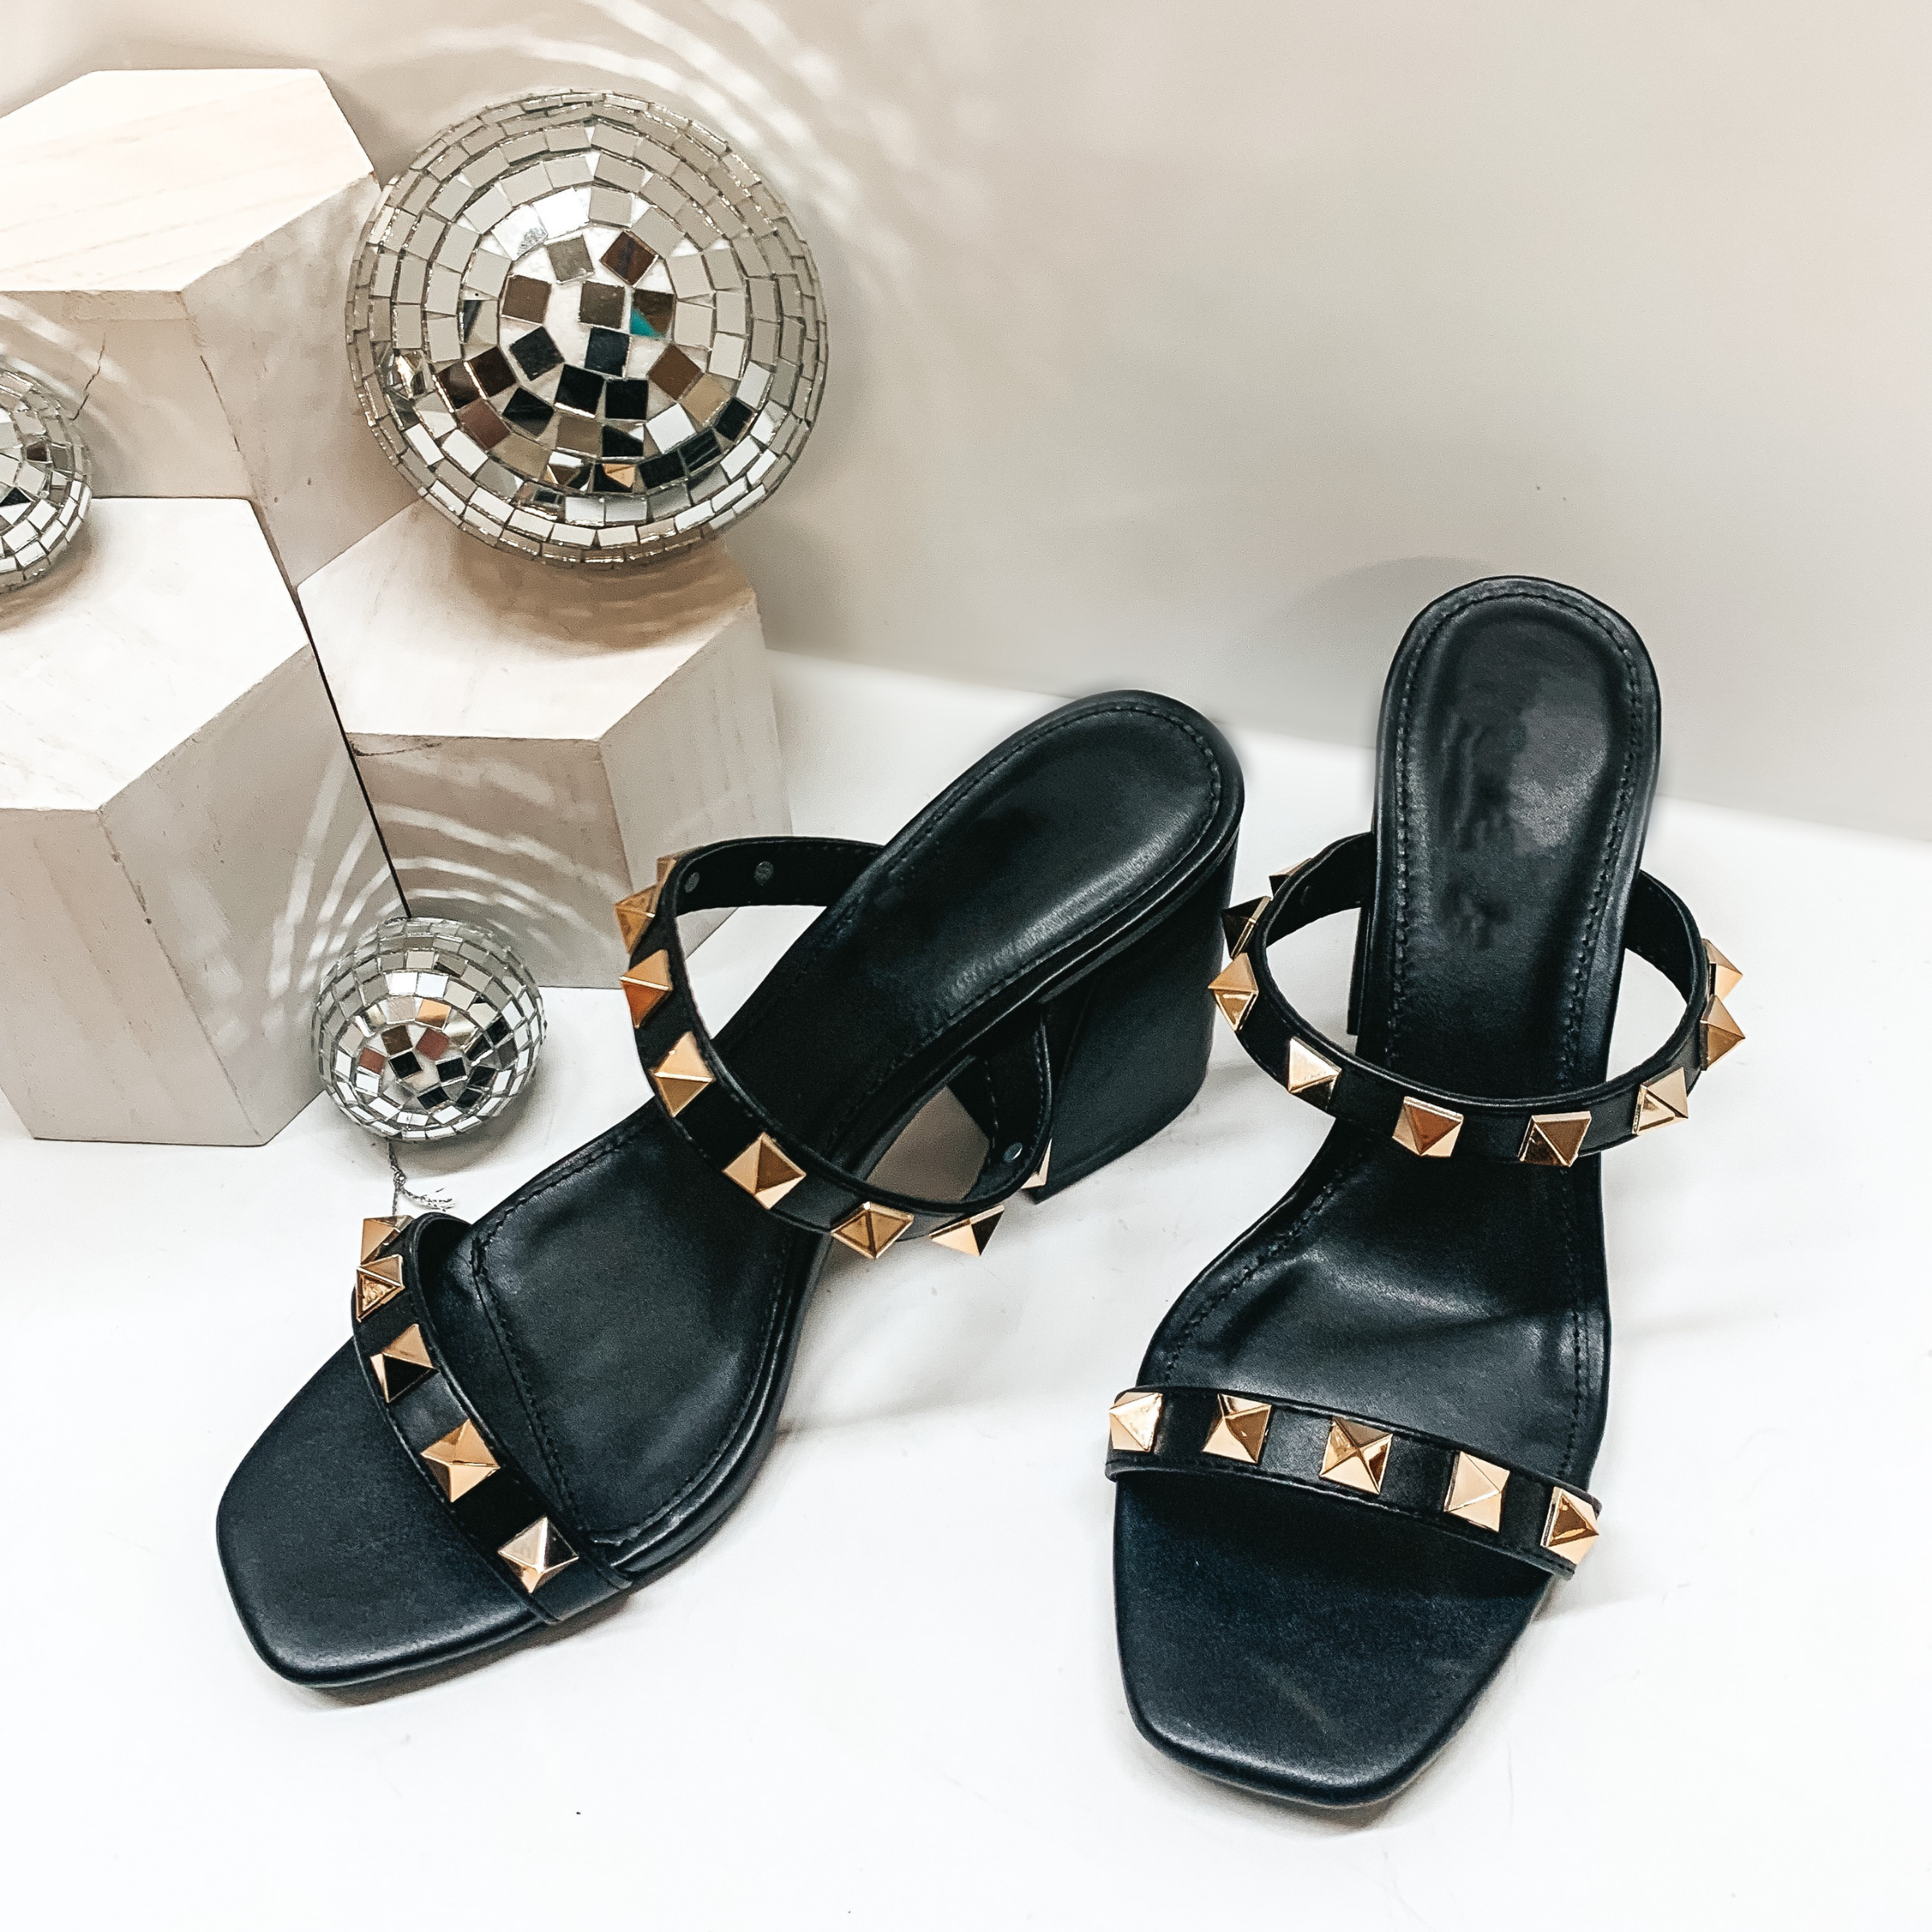 A pair of black strappy heels that have a square toe and block heel. The straps also have gold studs. These heels are pictured on a white background with white blocks and disco balls in one corner. 